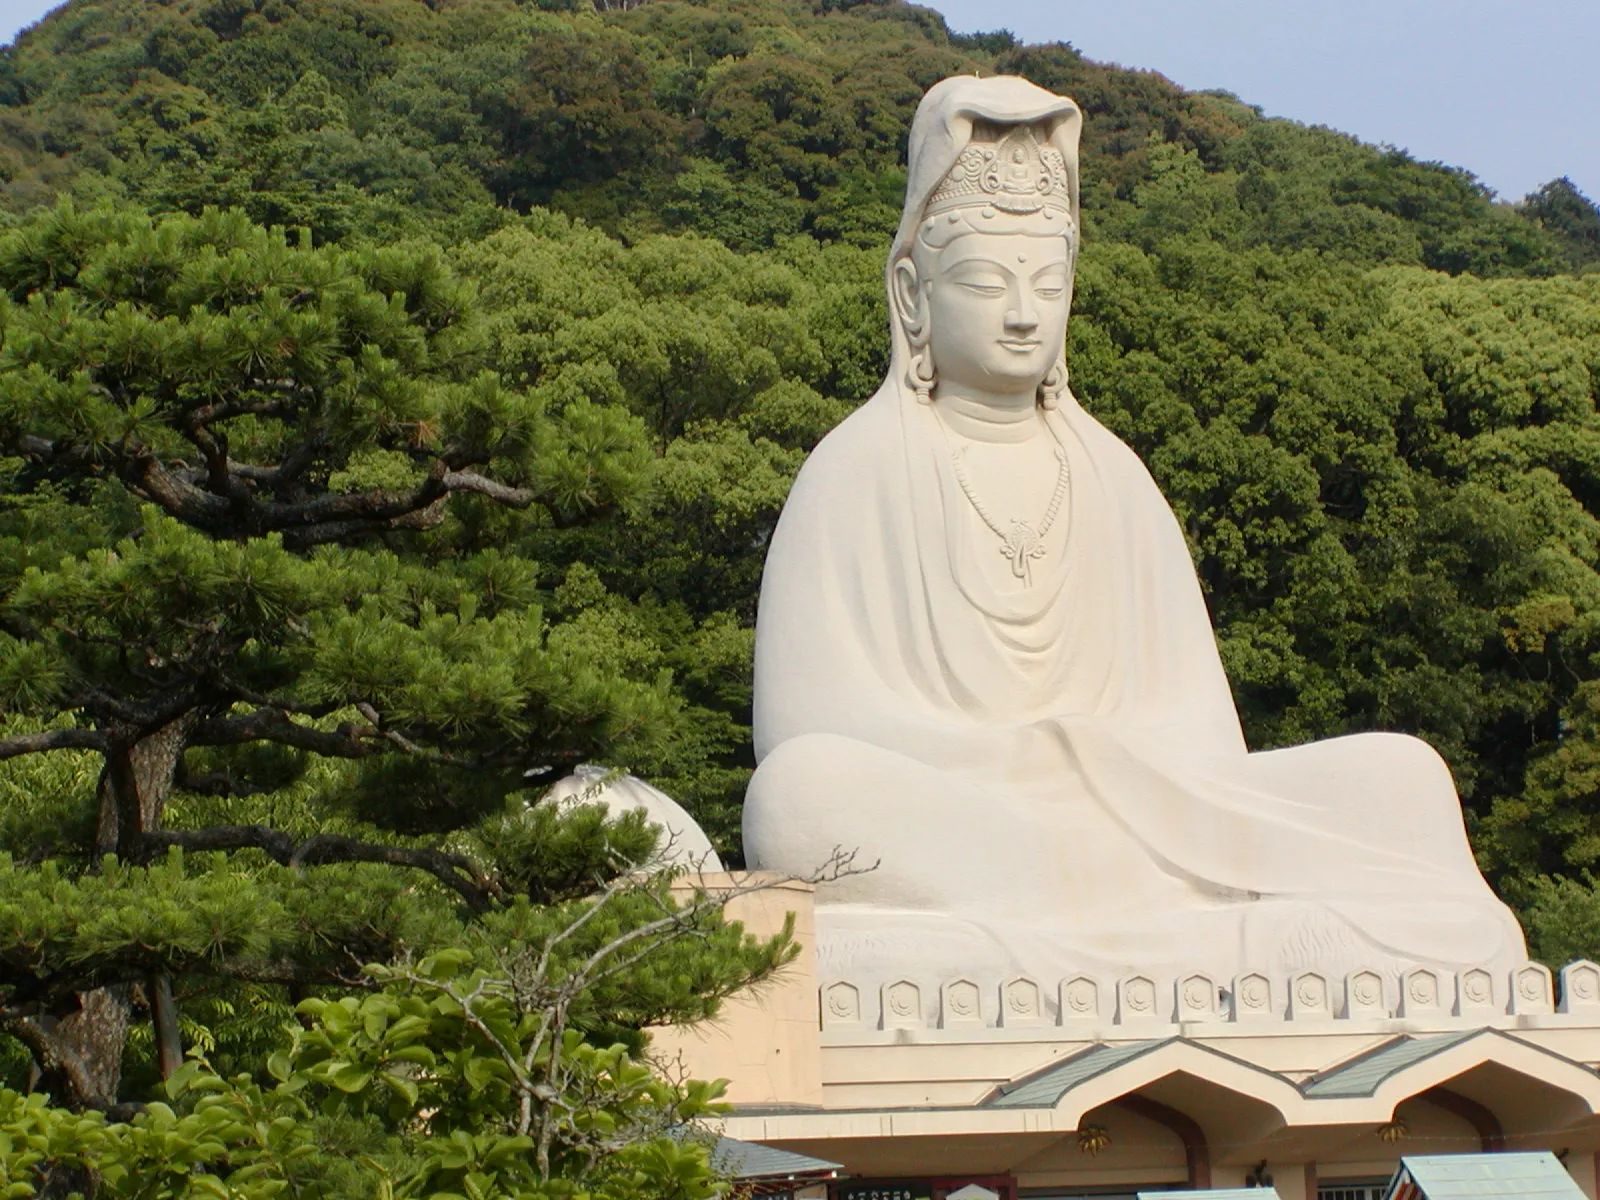 Photo of The statue of the goddess of mercy at Ryozen Kannon in Kyoto, Japan